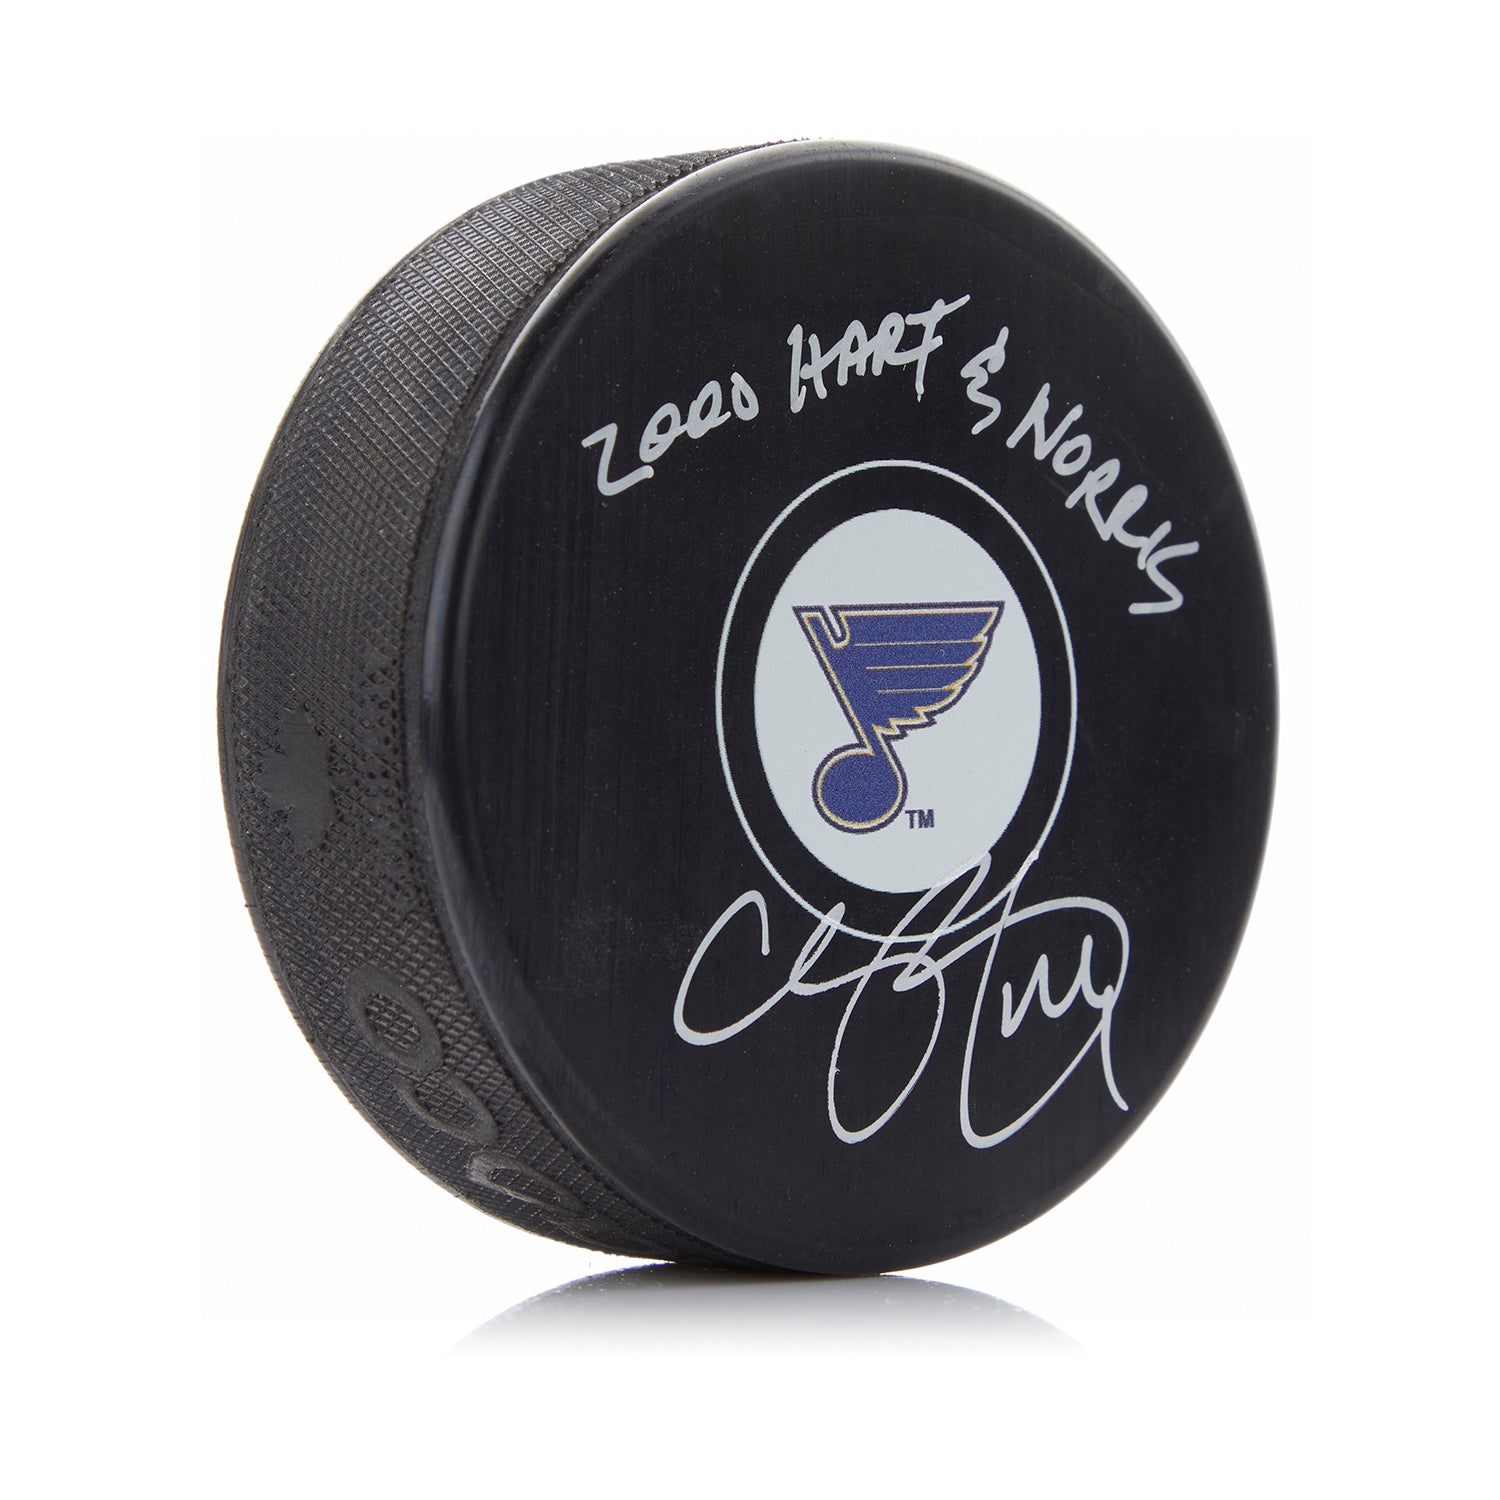 Chris Pronger Signed St Louis Blues Puck with Hart & Norris Note